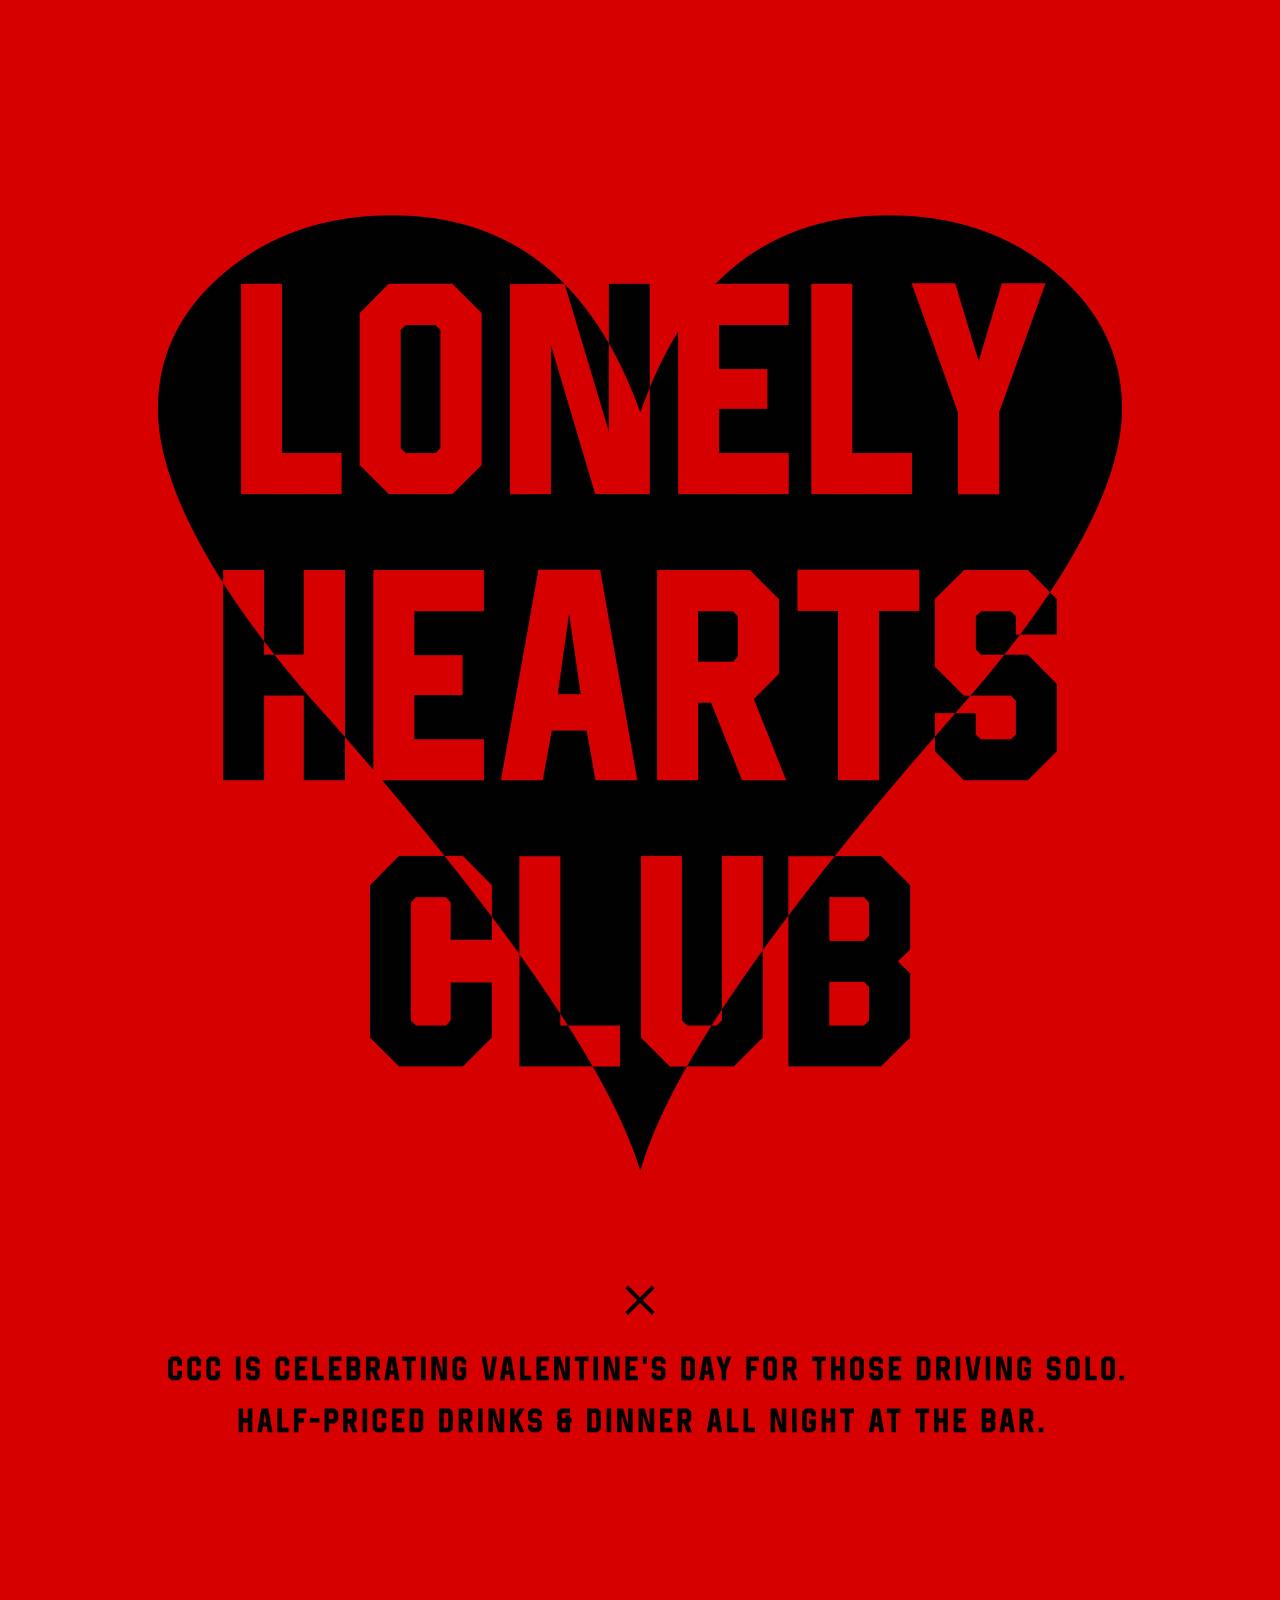 Valentine's Day @ CCC: Lonely Hearts Club